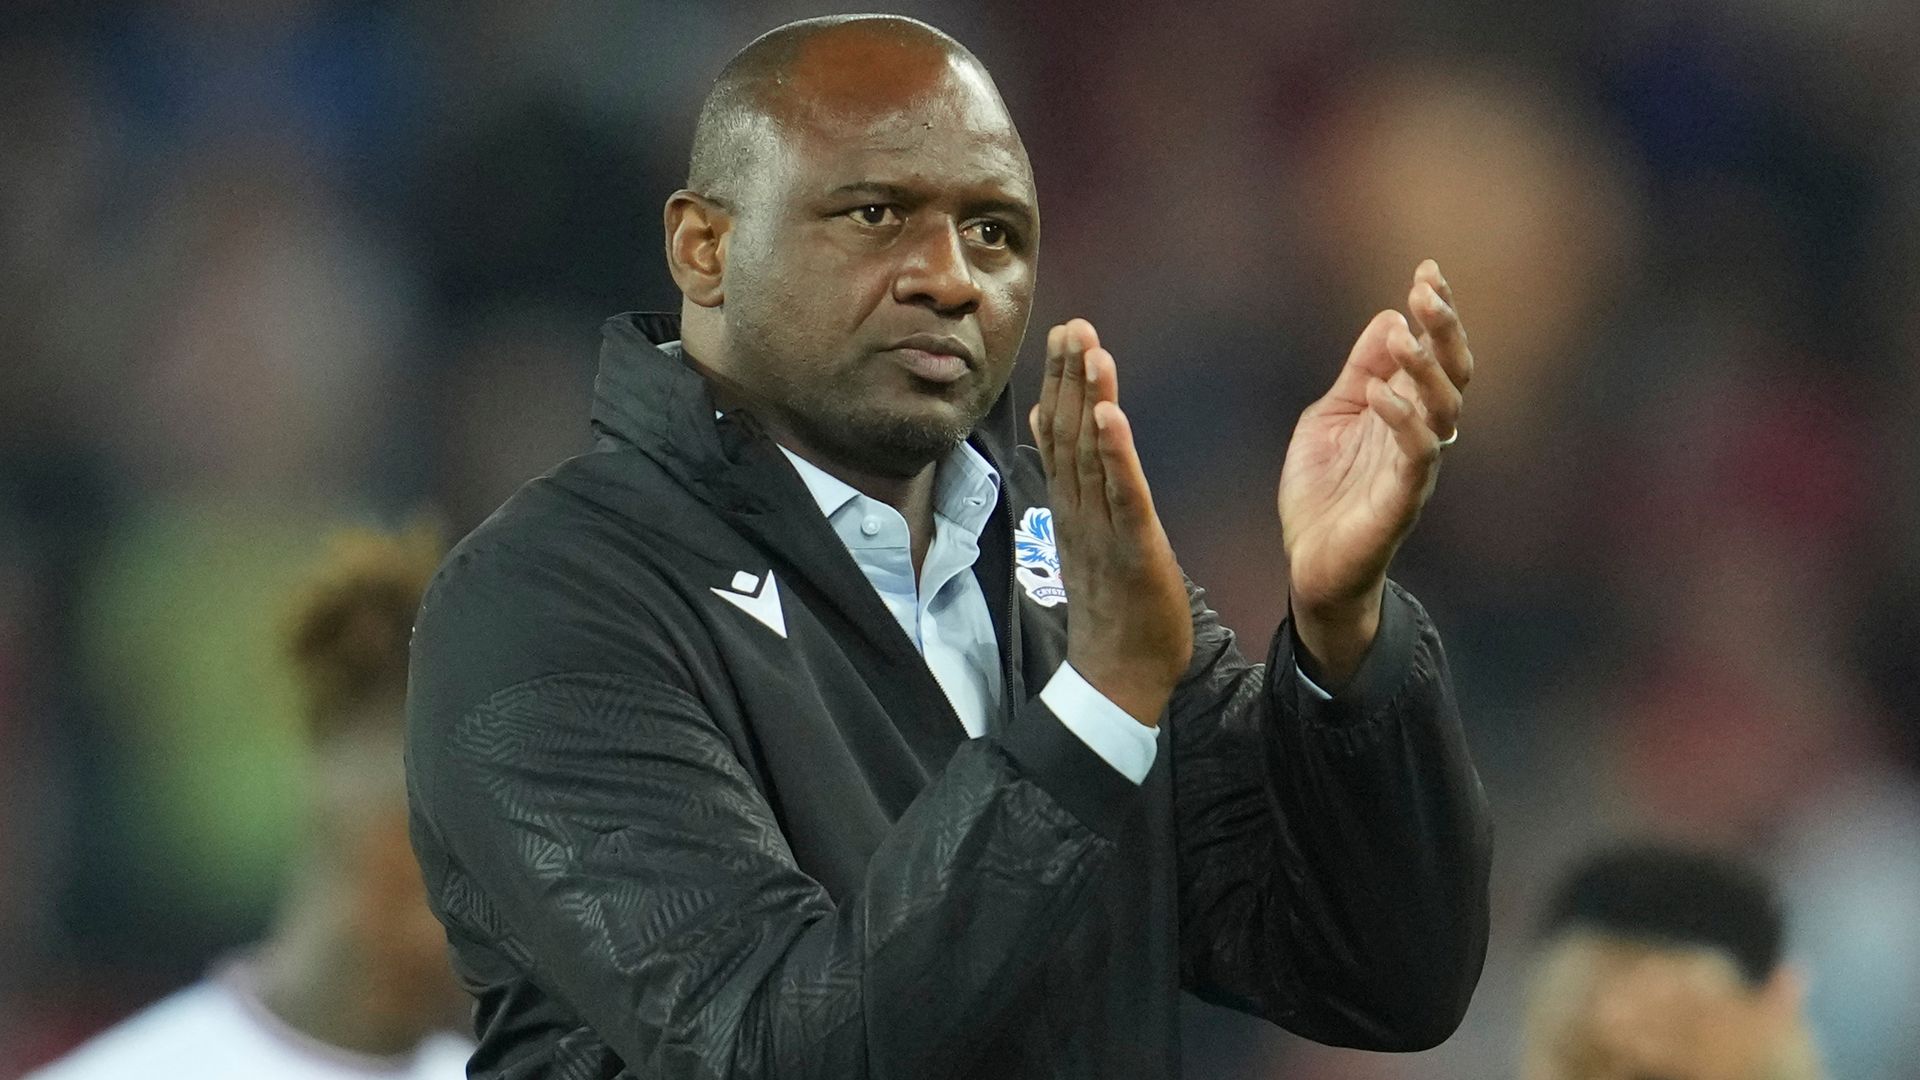 Vieira remains in contention as Leeds managerial search enters final stages